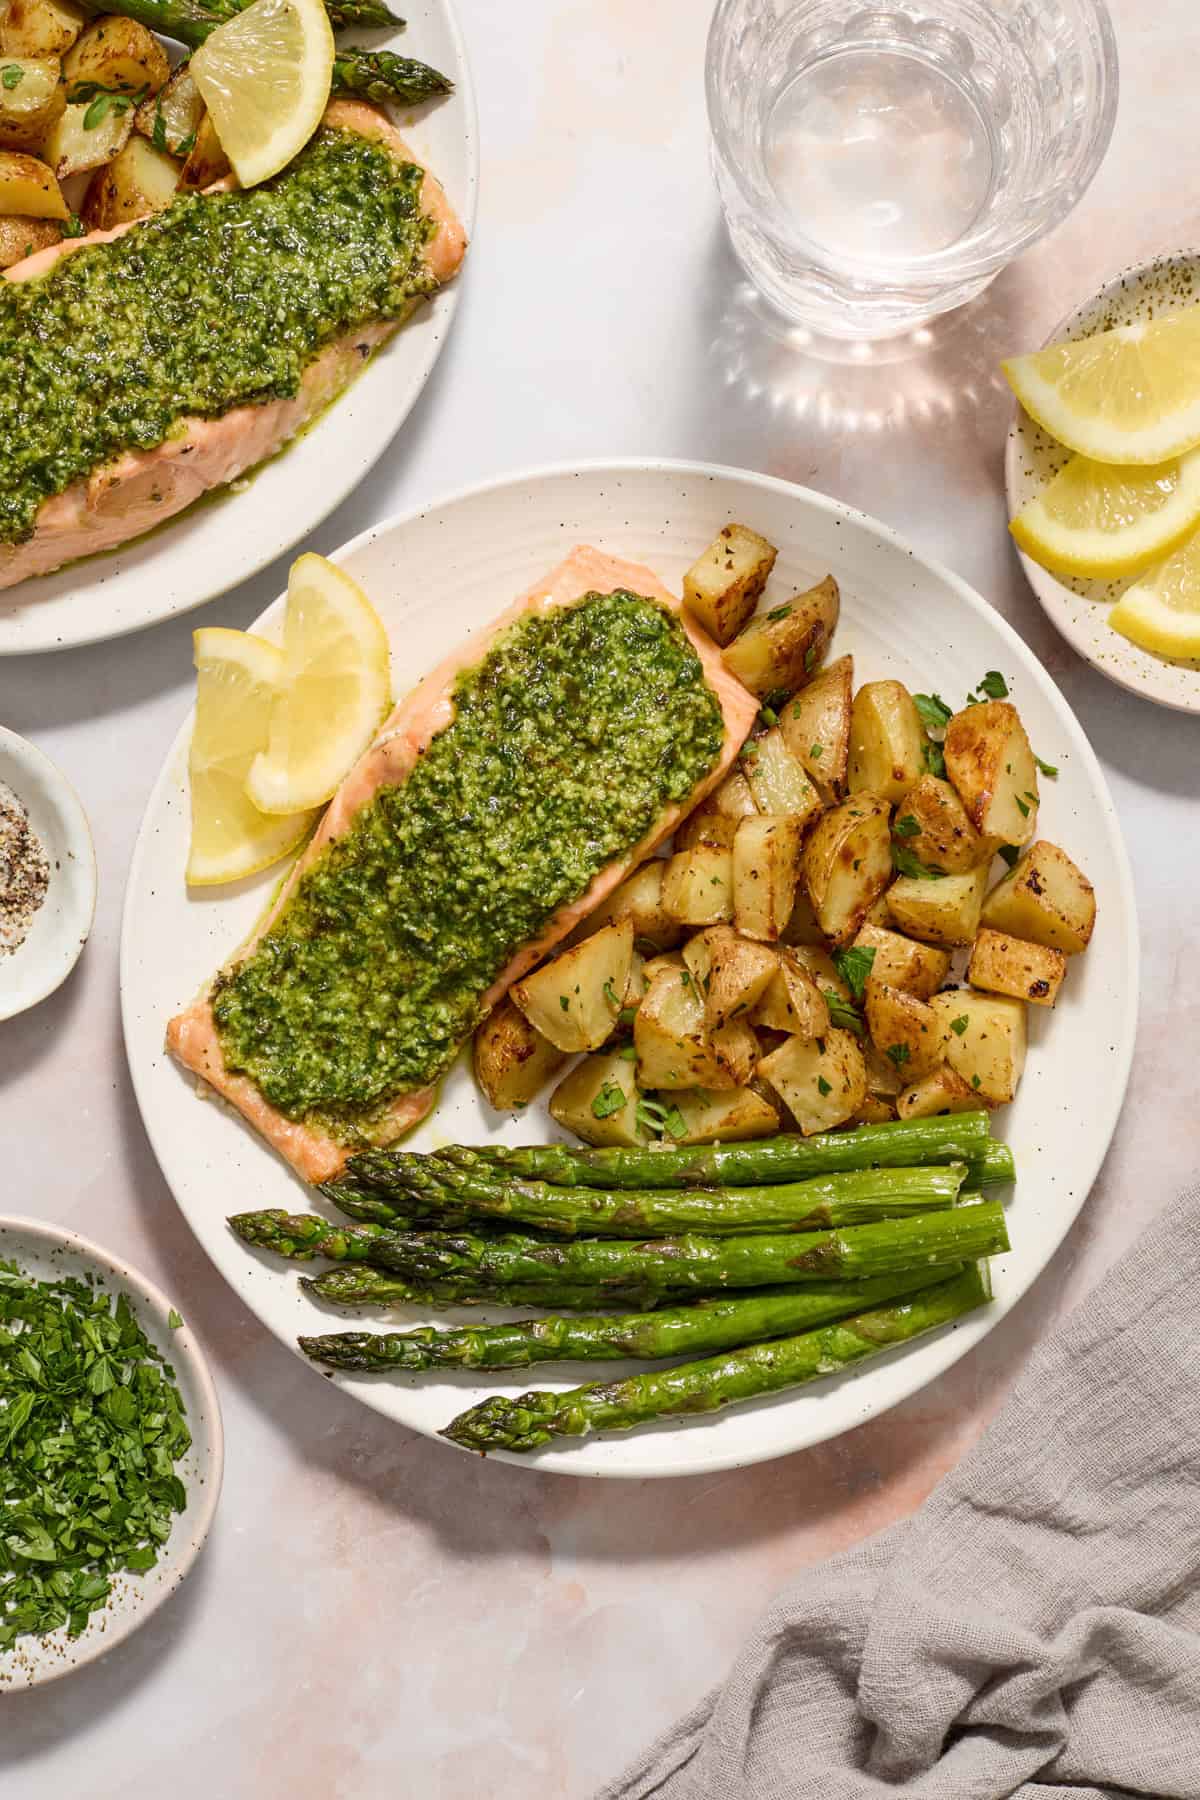 Pesto covered salmon on white plate with parmesan potatoes, asparagus and lemon slices.